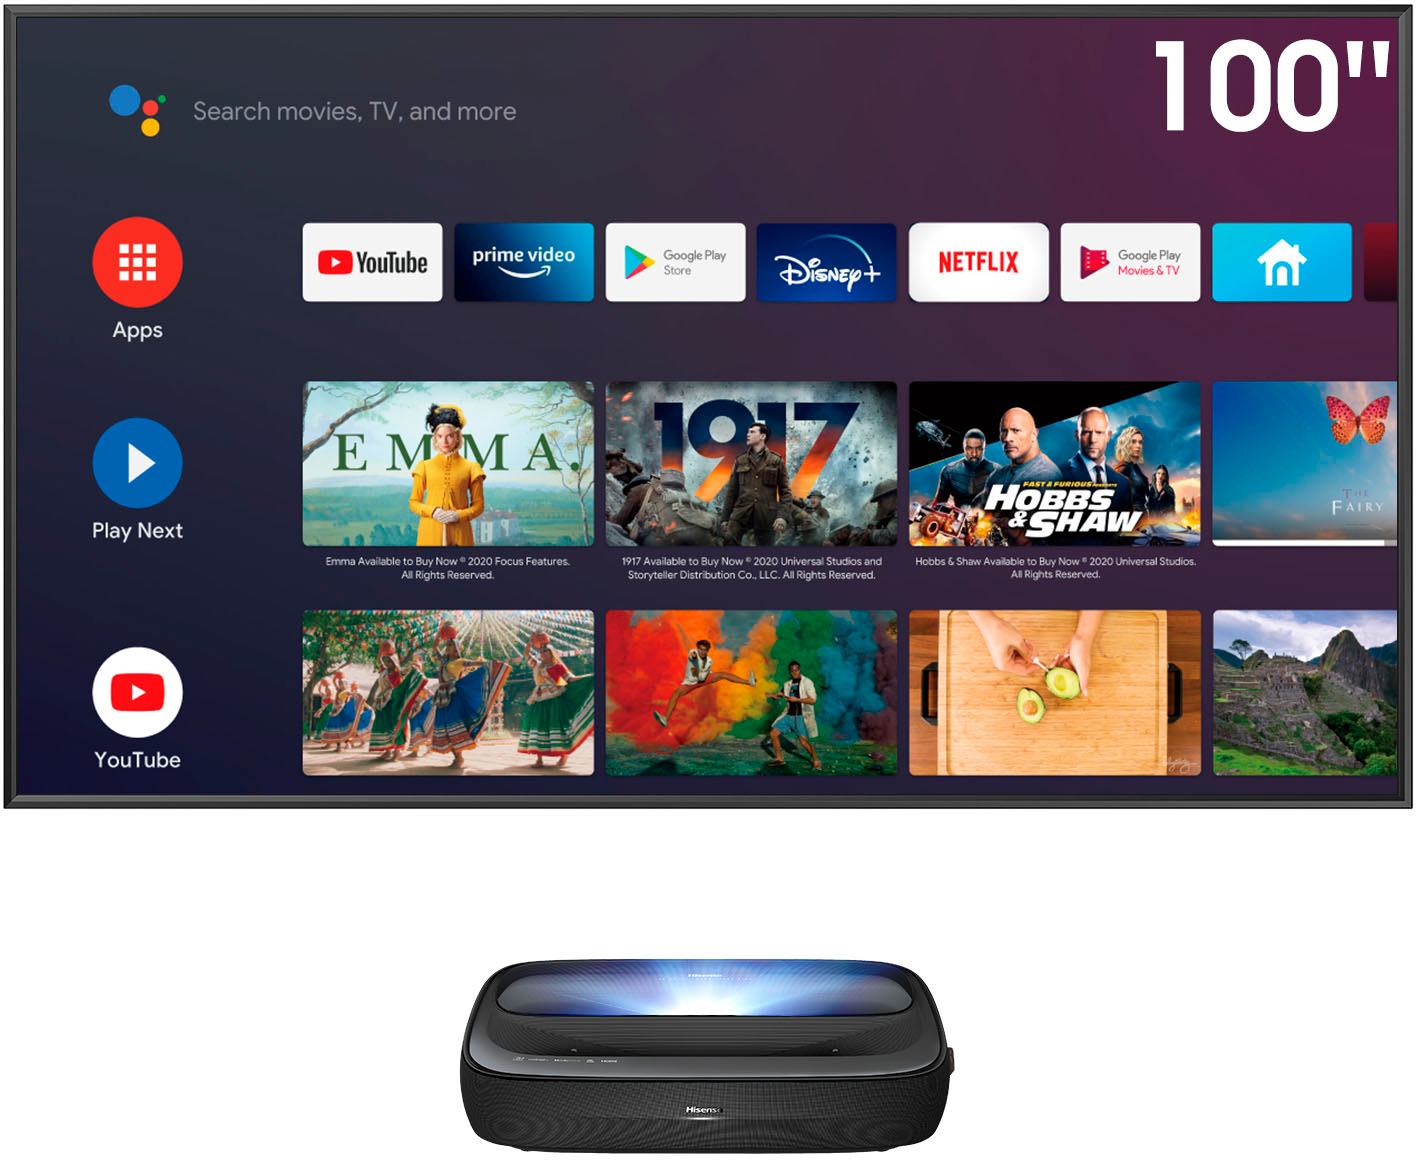 Proyector Android Tv 10.0, Compatible Con 4k, Wifi, Bluetoot